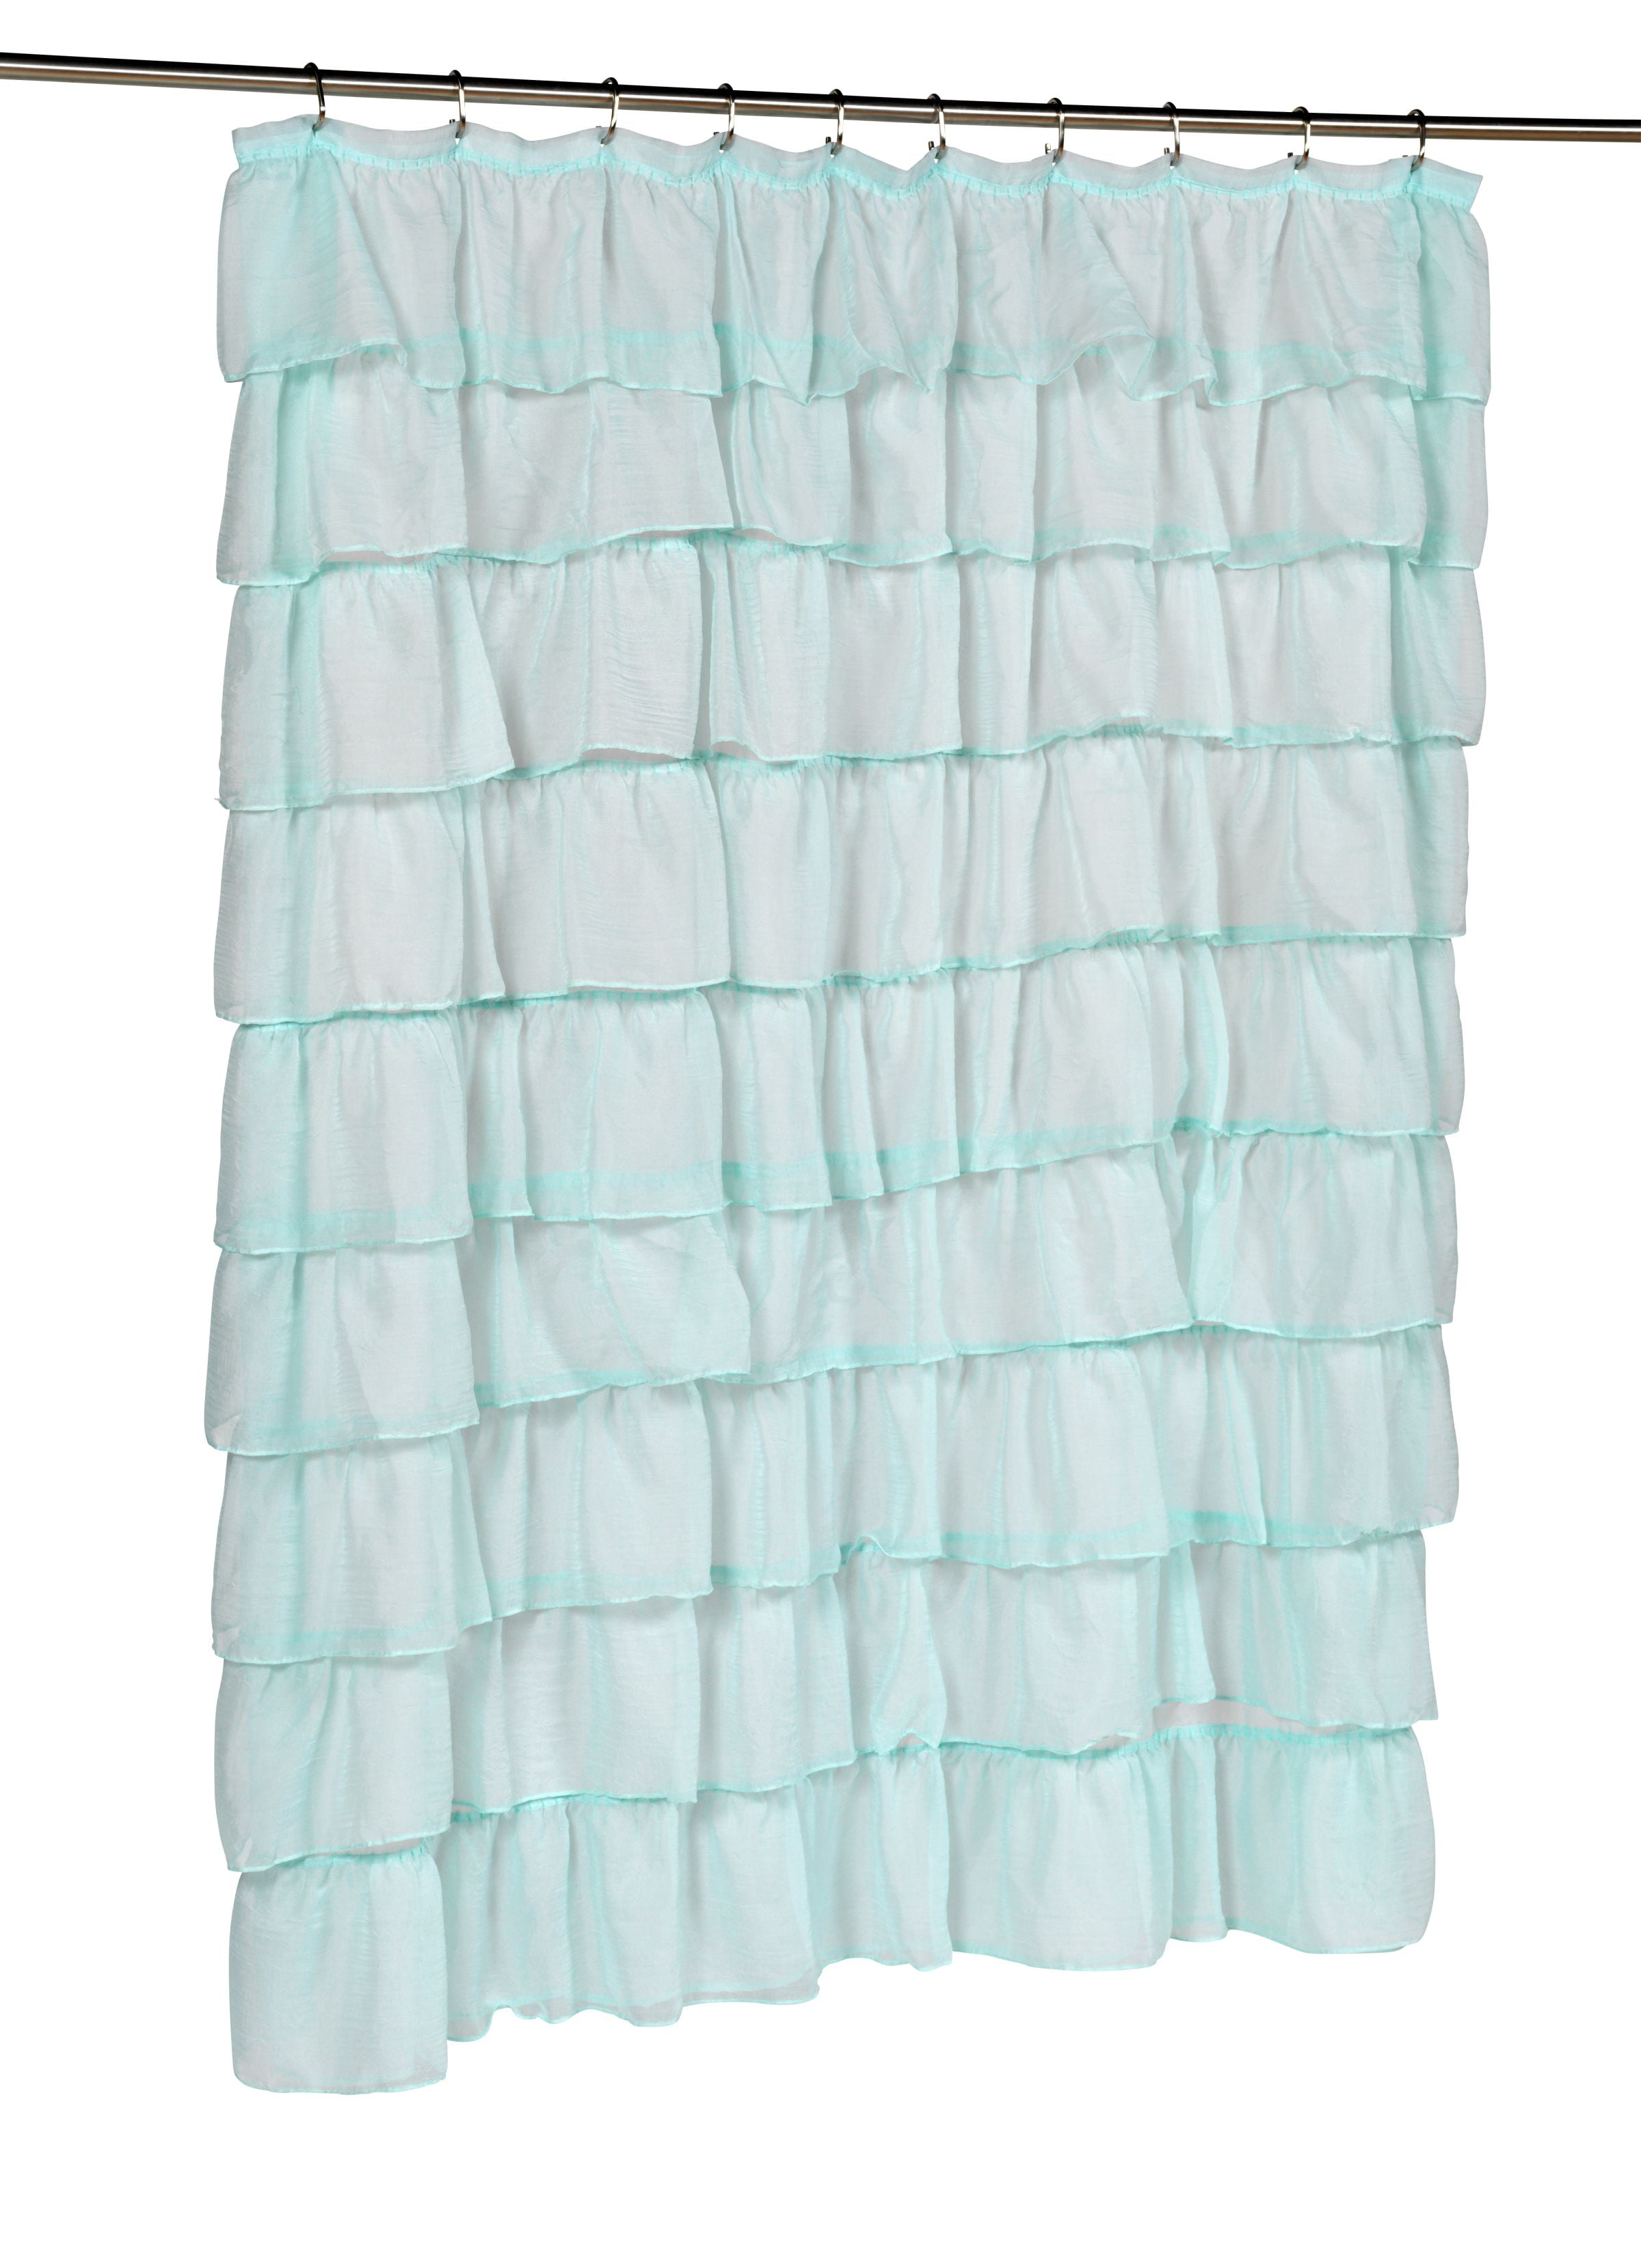 Fabric Shower Curtain 70" x 72" Elegant Crushed Voile Ruffled Tier Spa Blue 